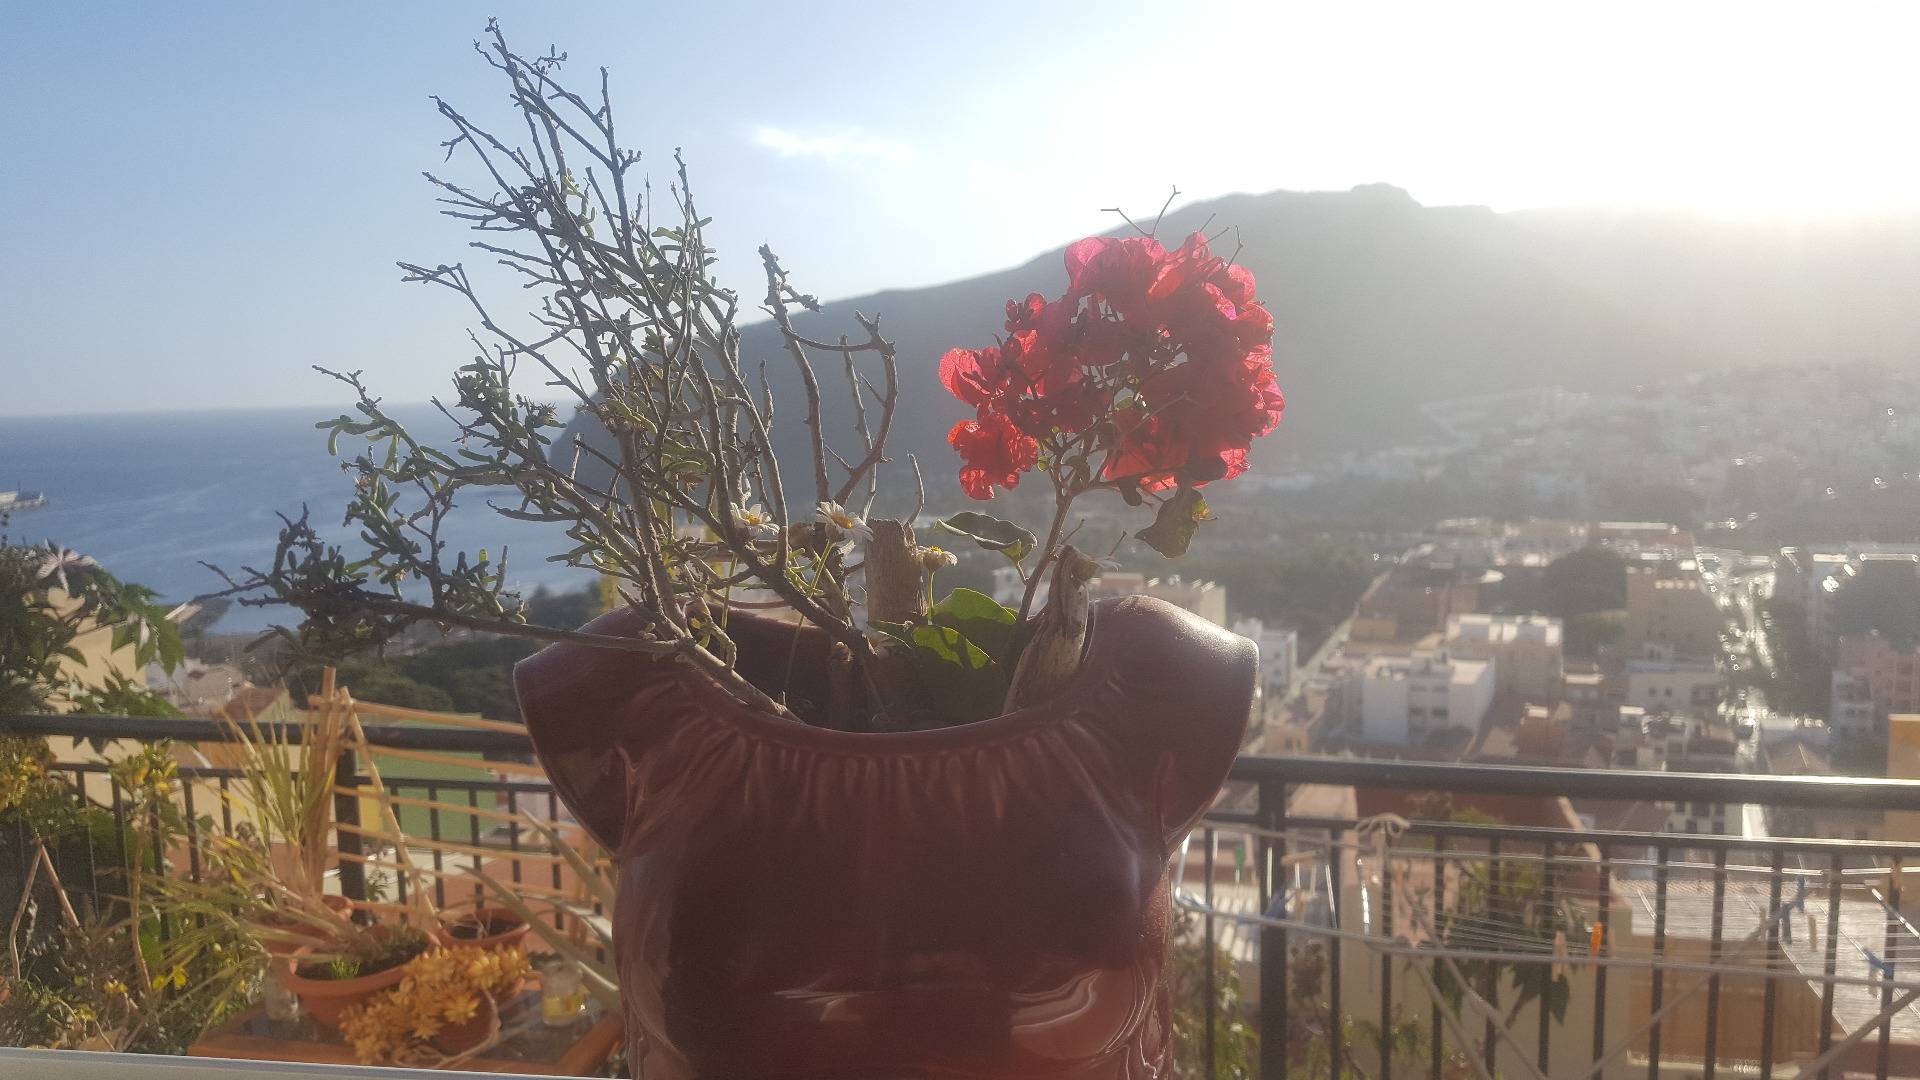 How to decorate a vase in the shape of a female breast? In a rented apartment in Gomera.